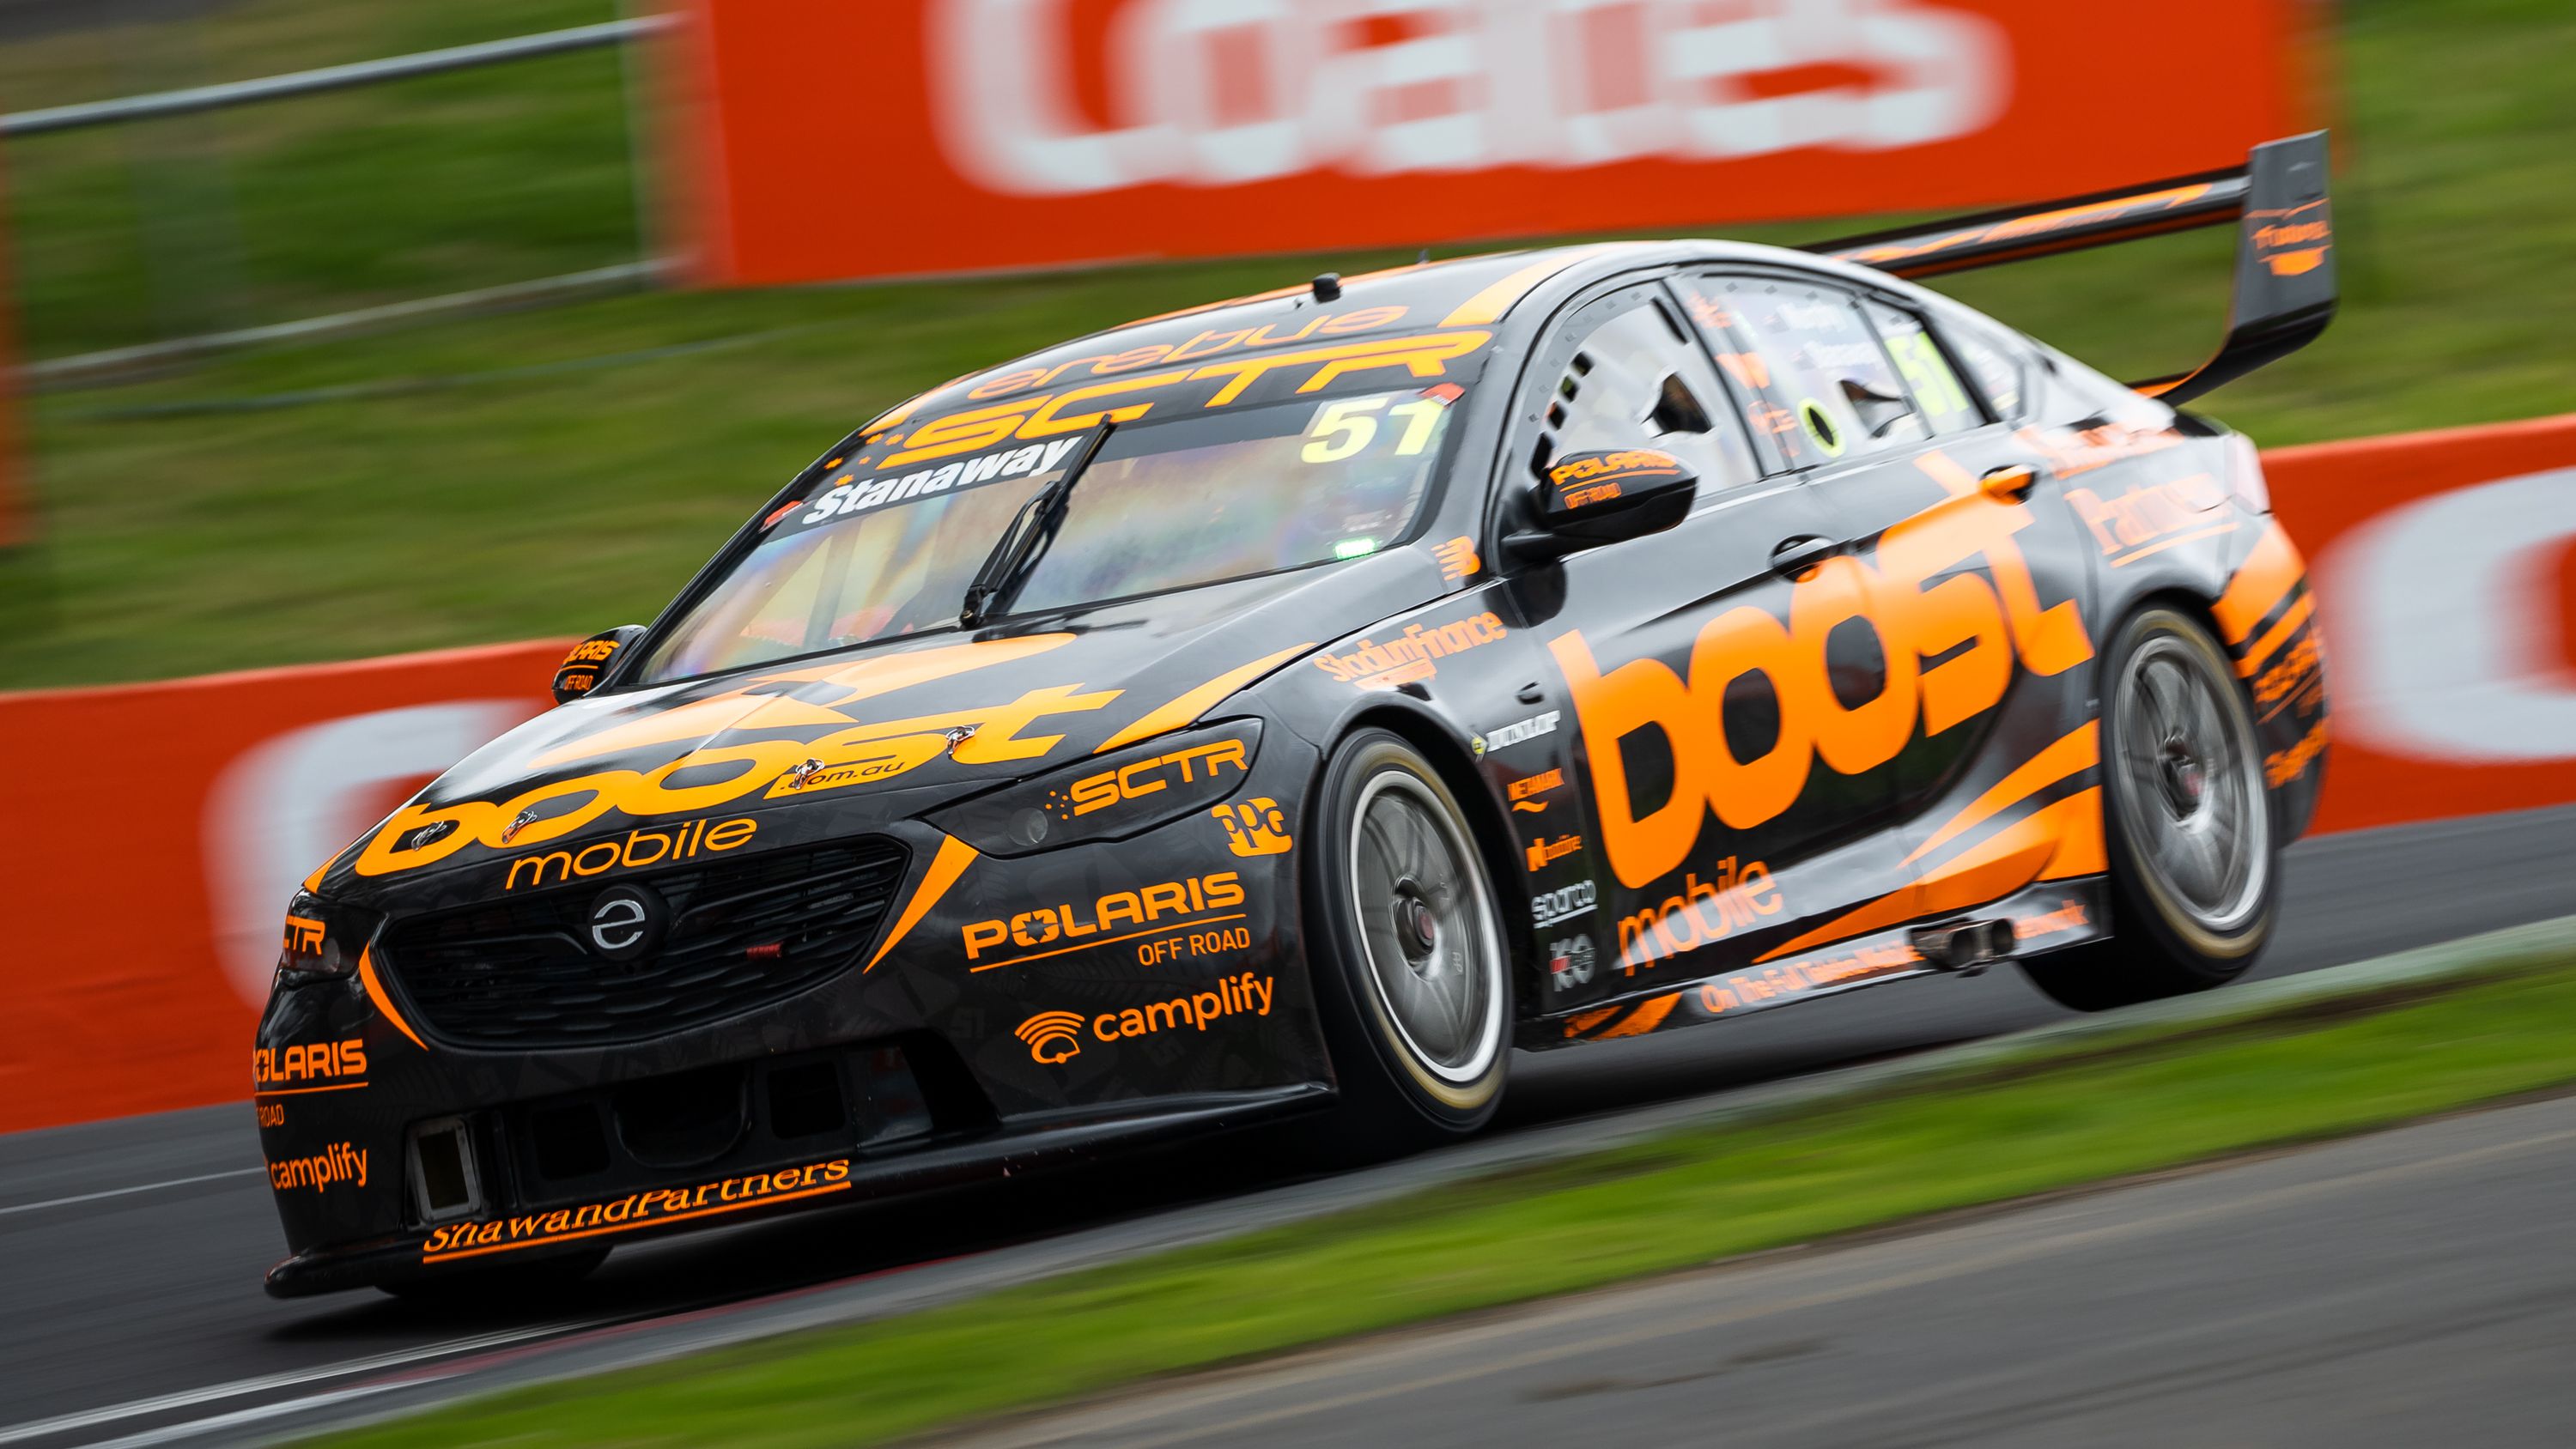 Greg Murphy drives the #51 Boost Mobile Holden Commodore during practice for the Bathurst 1000, which is race 30 of 2022 Supercars Championship Season at Mount Panorama on October 06, 2022 in Bathurst, Australia. (Photo by Daniel Kalisz/Getty Images)